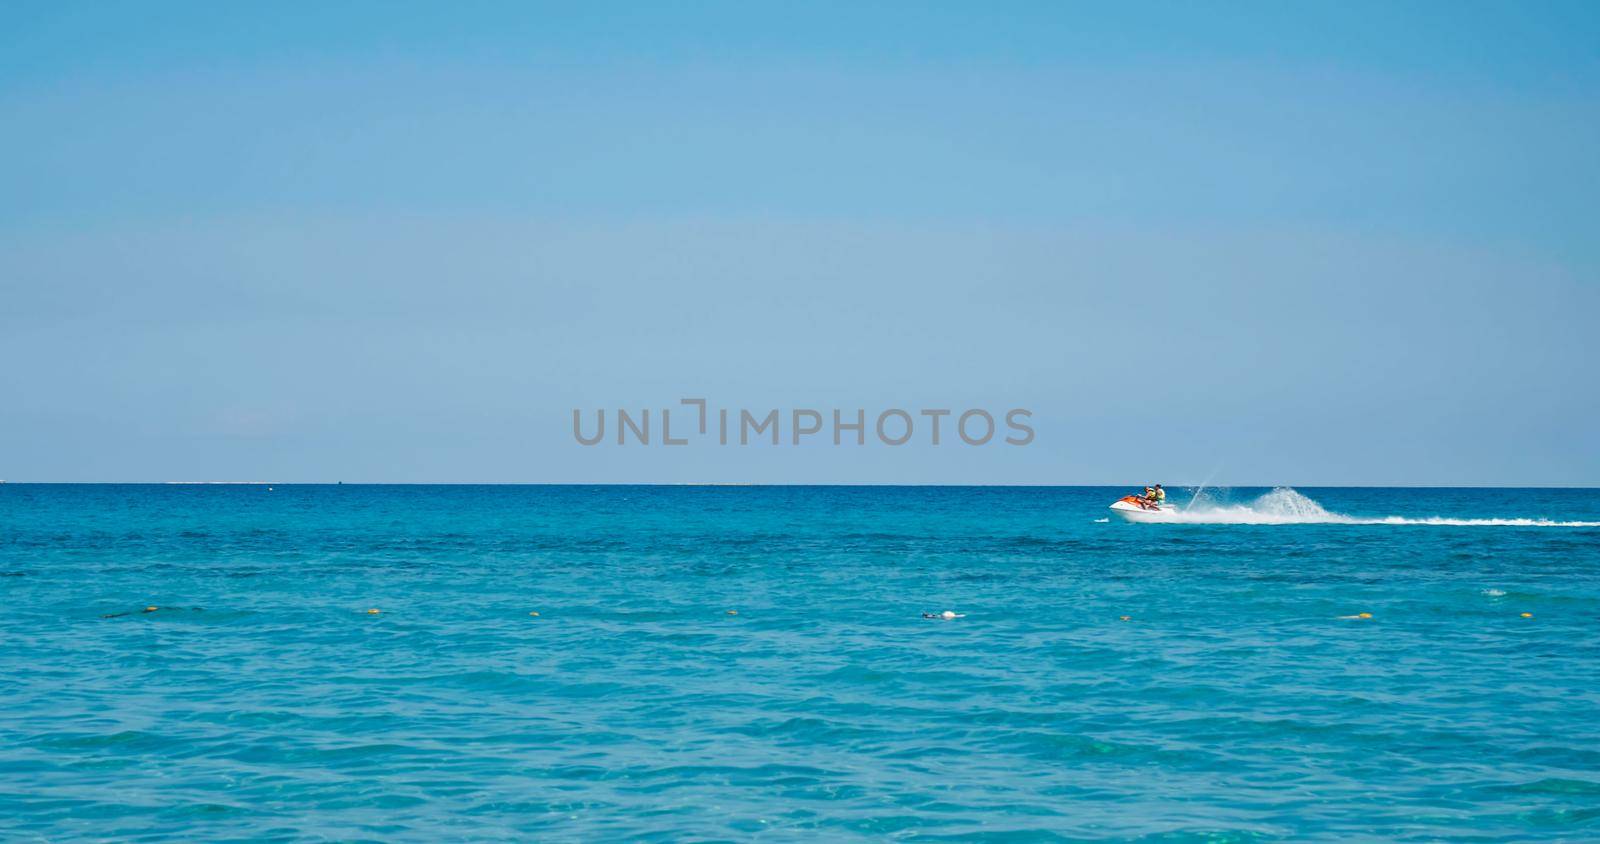 Water scooter on blue. People enjoy summer days riding jet skis, Tunisia, Africa, Mediterranean sea. Summer and travel vacation concept. Vacation activities at sea.